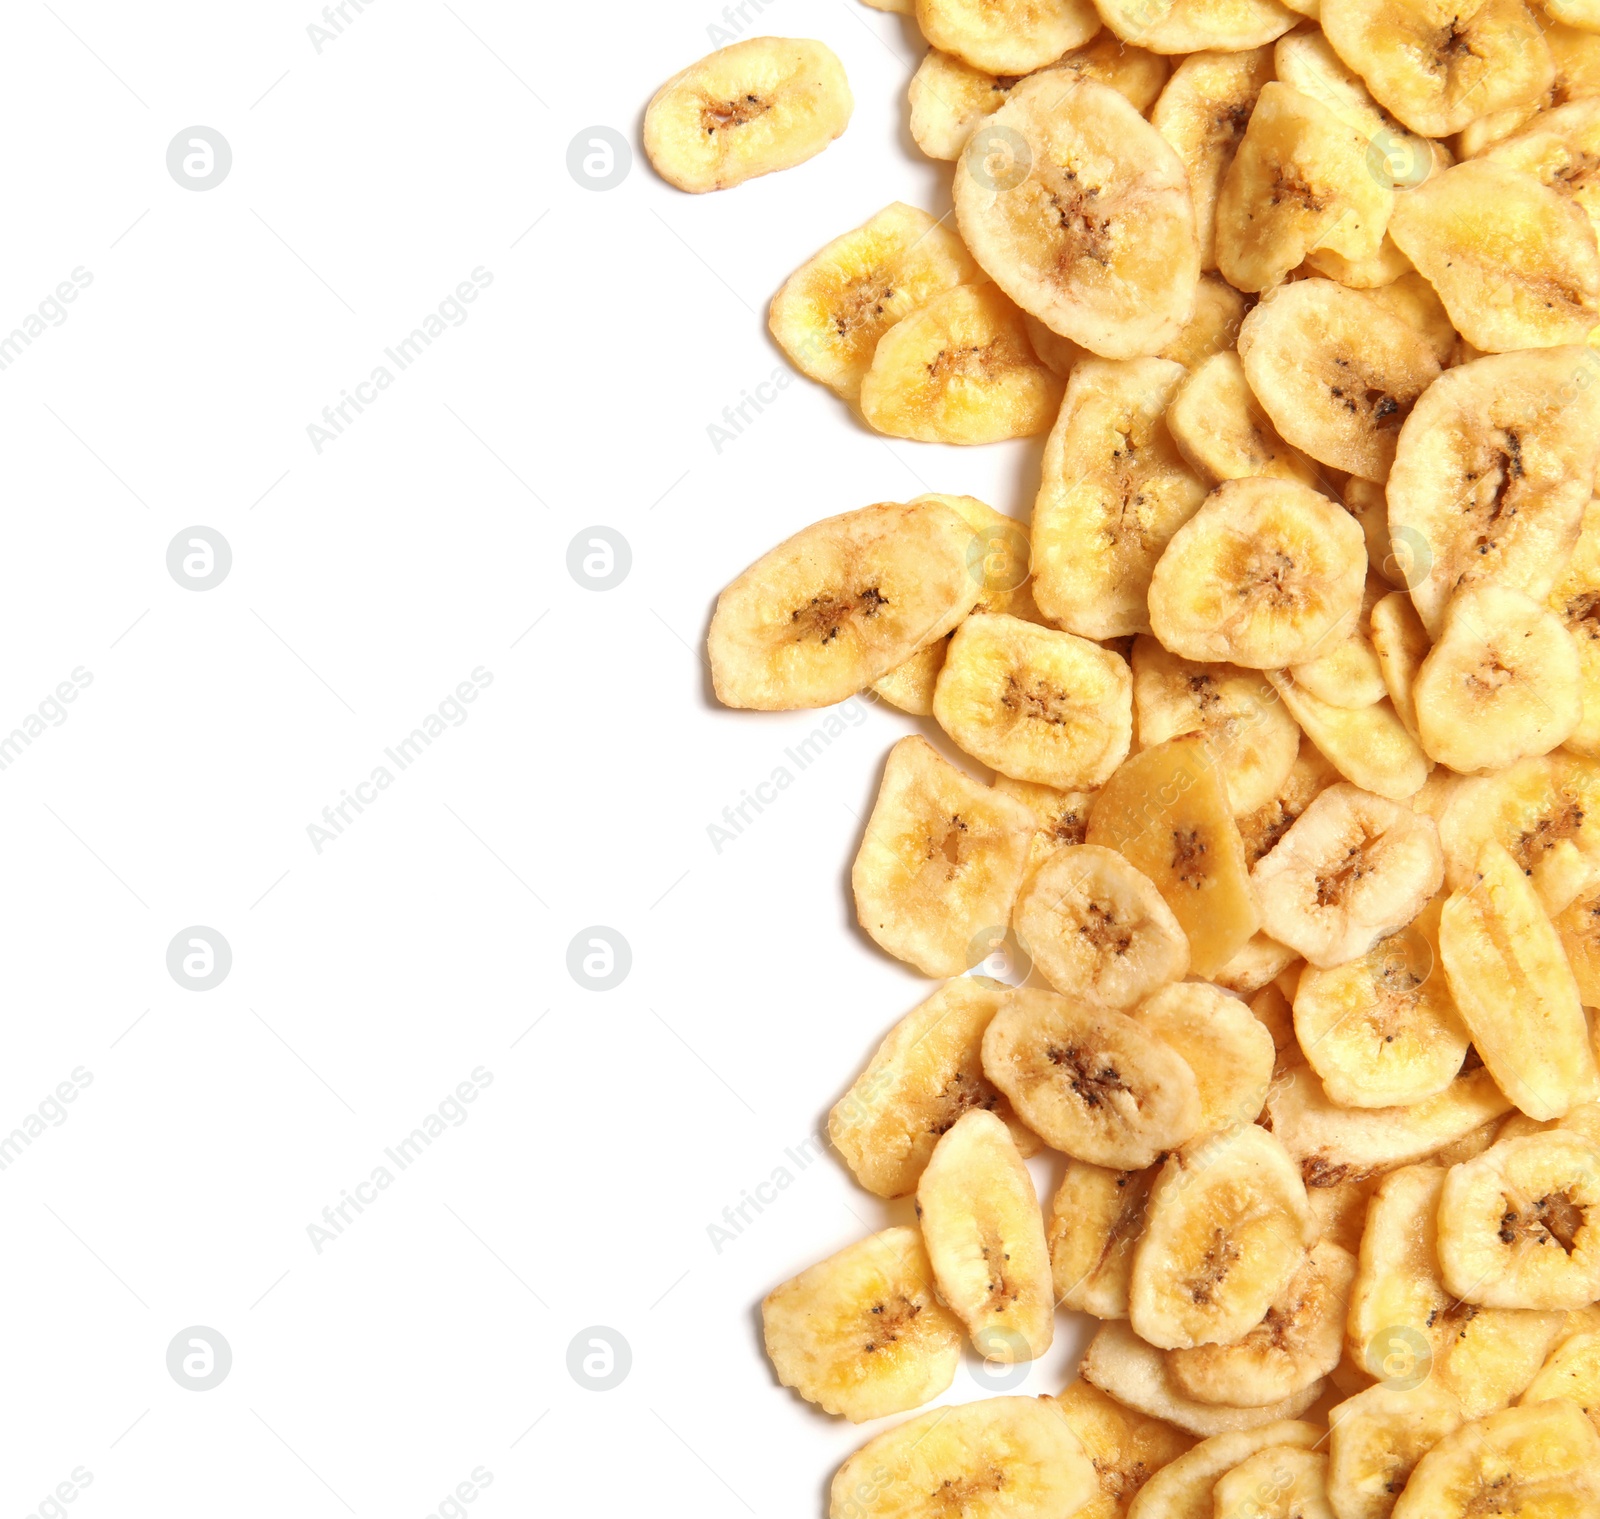 Photo of Tasty banana slices on white background, top view with space for text. Dried fruit as healthy snack